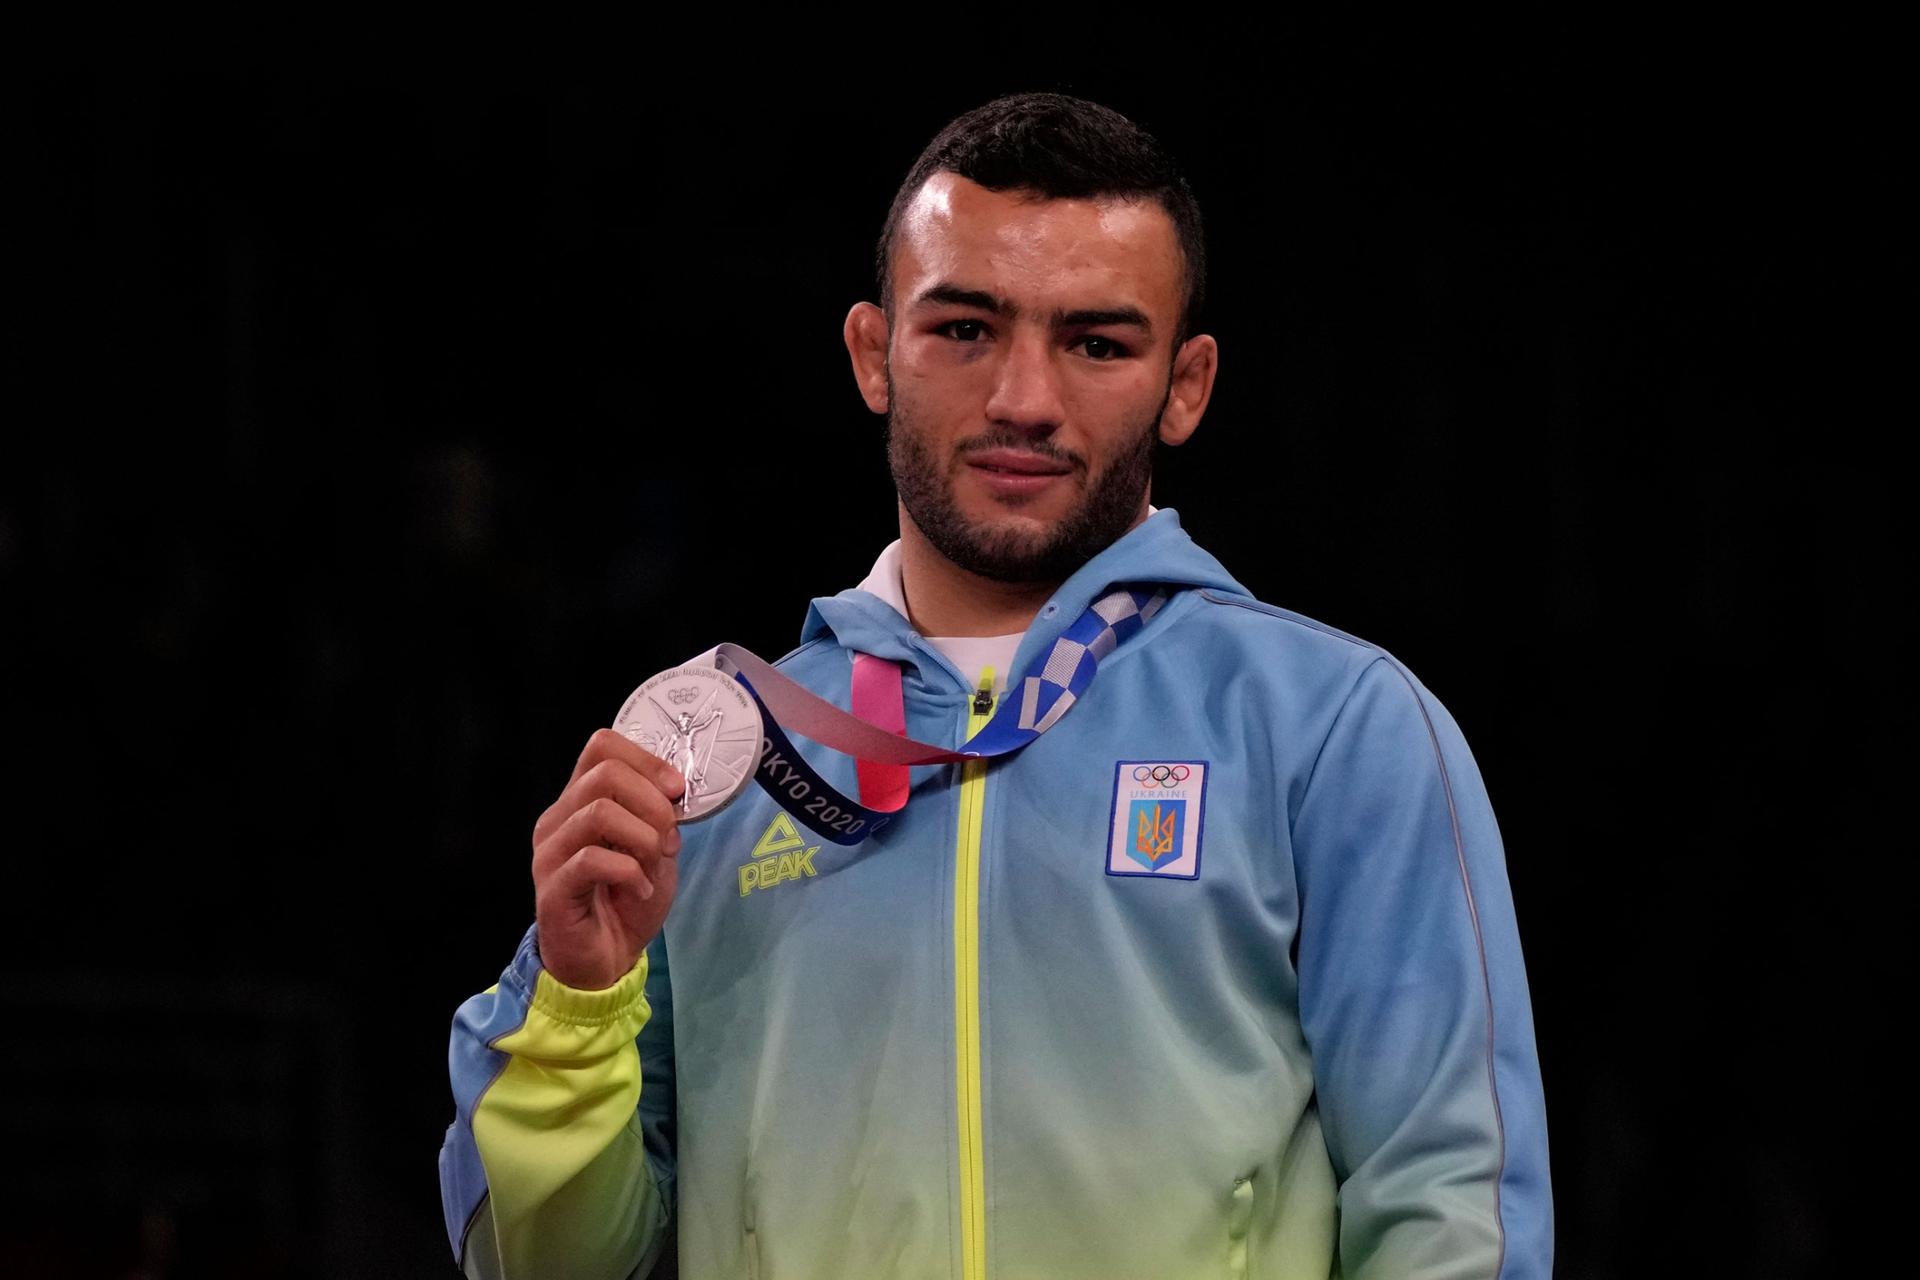 Silver medalist, Ukraine's Parviz Nasibov celebrates on the podium during the medal ceremony for the men's 67kg Greco-Roman wrestling at the 2020 Summer Olympics, Wednesday, Aug. 4, 2021, in Chiba, Japan. 